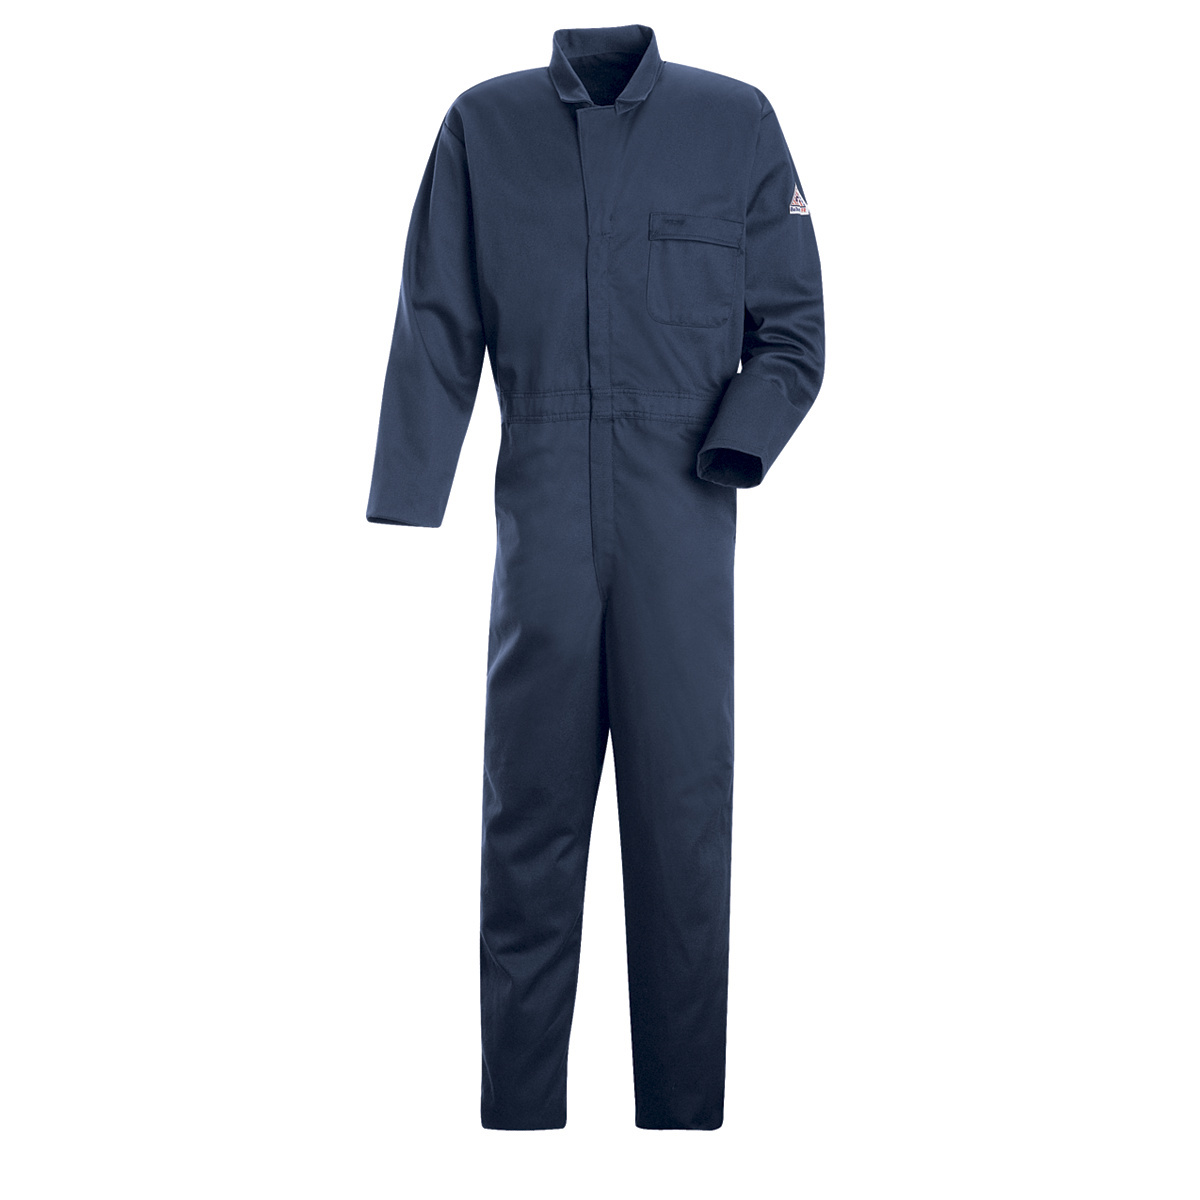 Bulwark® 5X Regular Navy Blue EXCEL FR® Twill Cotton Flame Resistant Coveralls With Zipper Front Closure